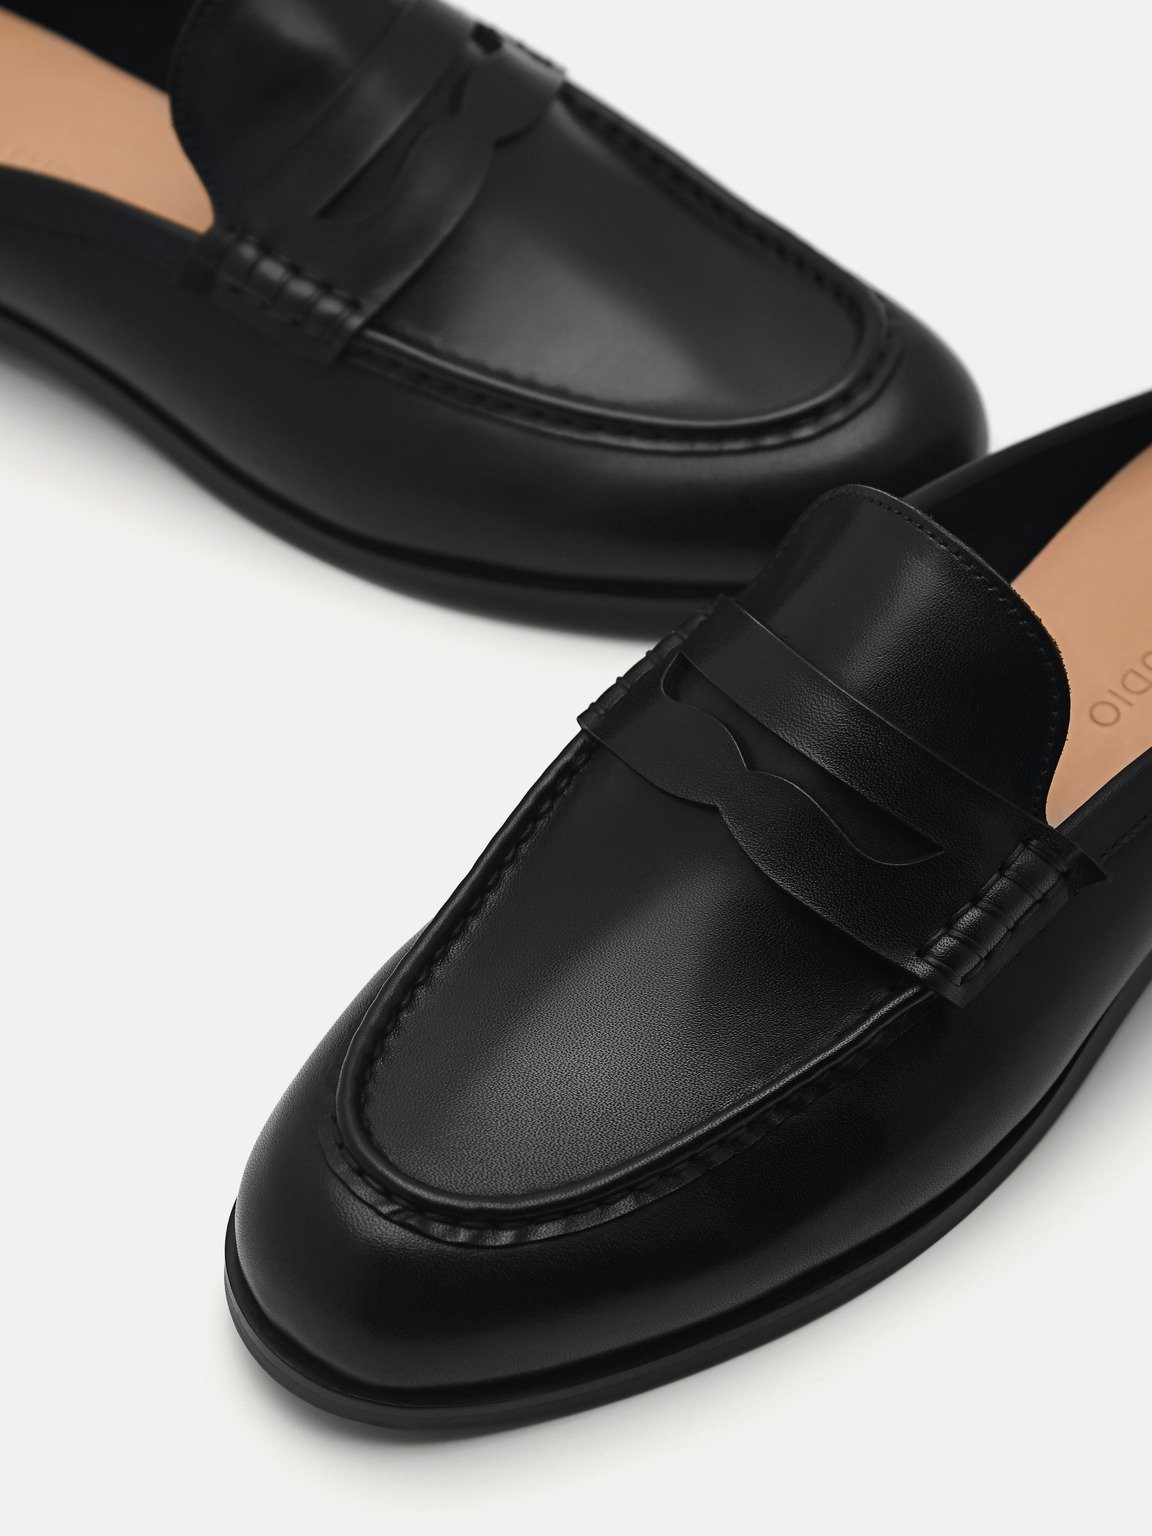 Blake Leather Penny Loafer Mules, Black